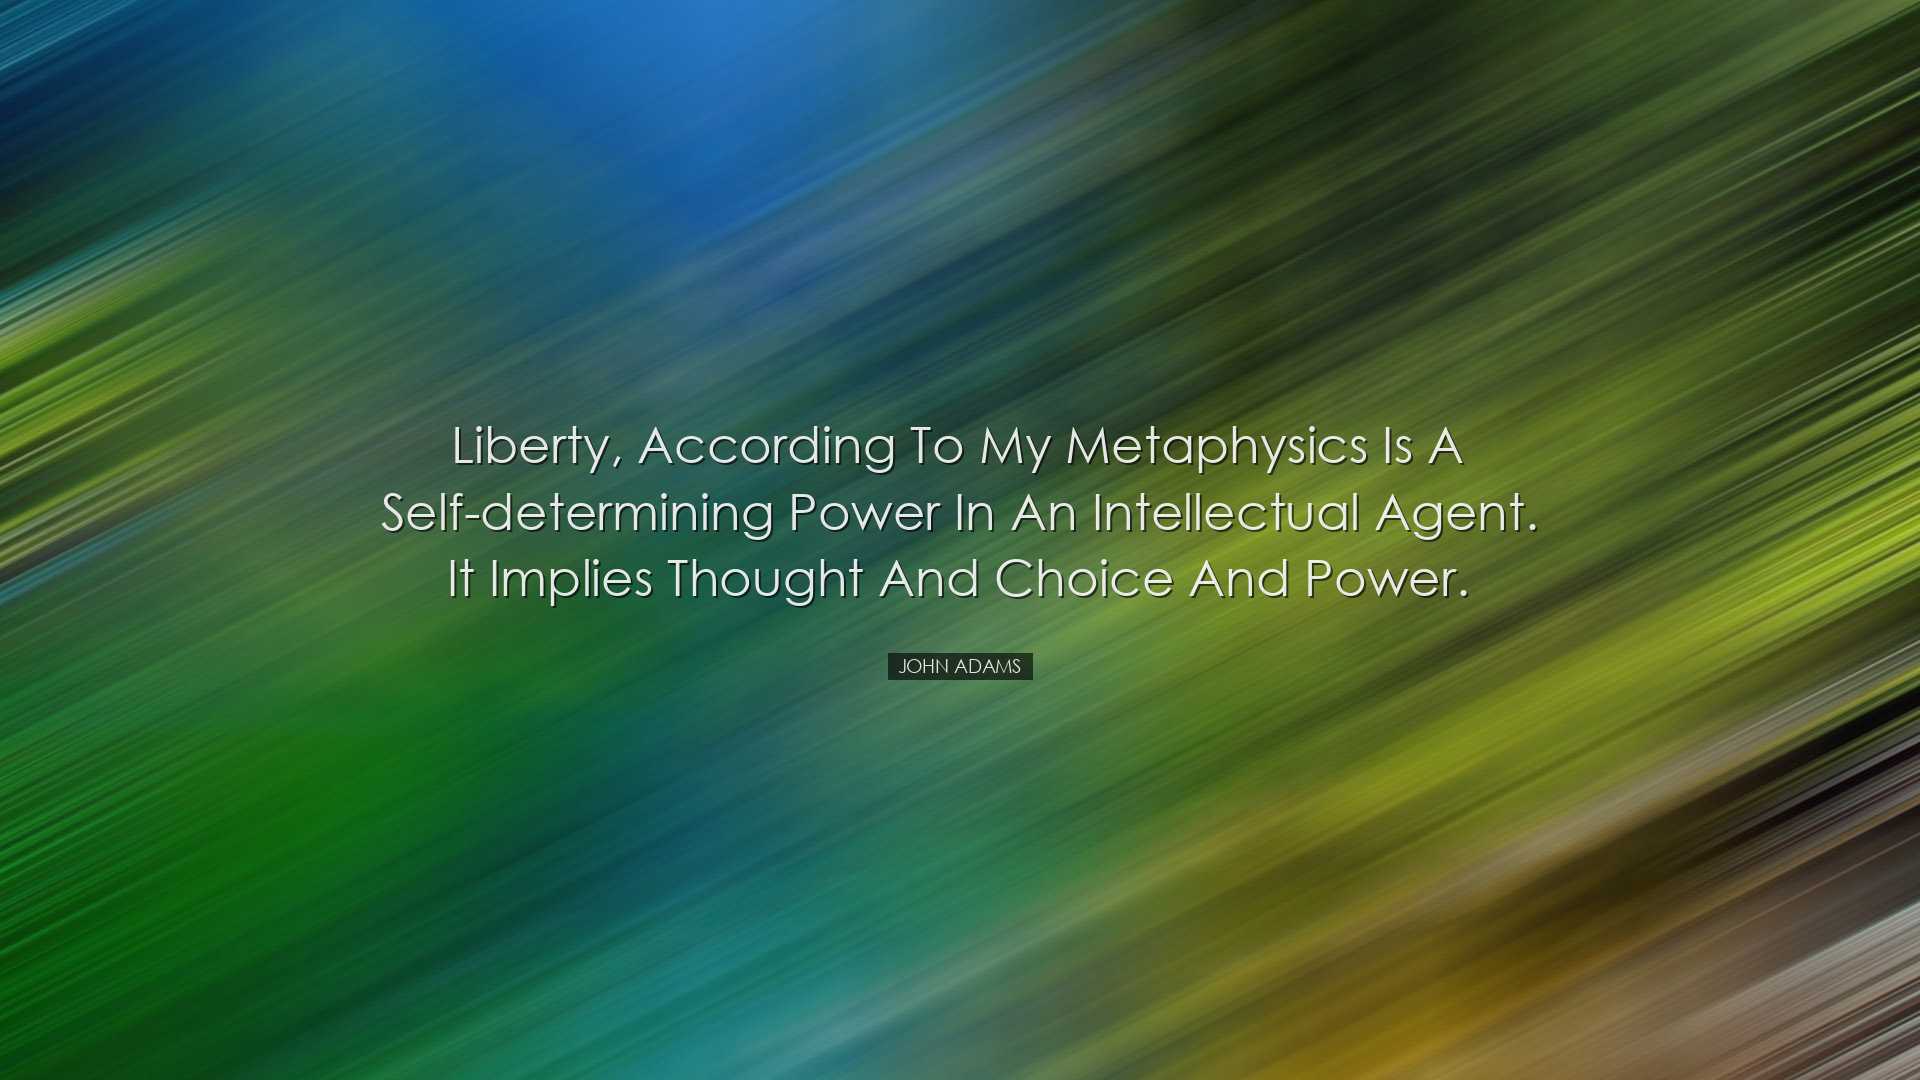 Liberty, according to my metaphysics is a self-determining power i